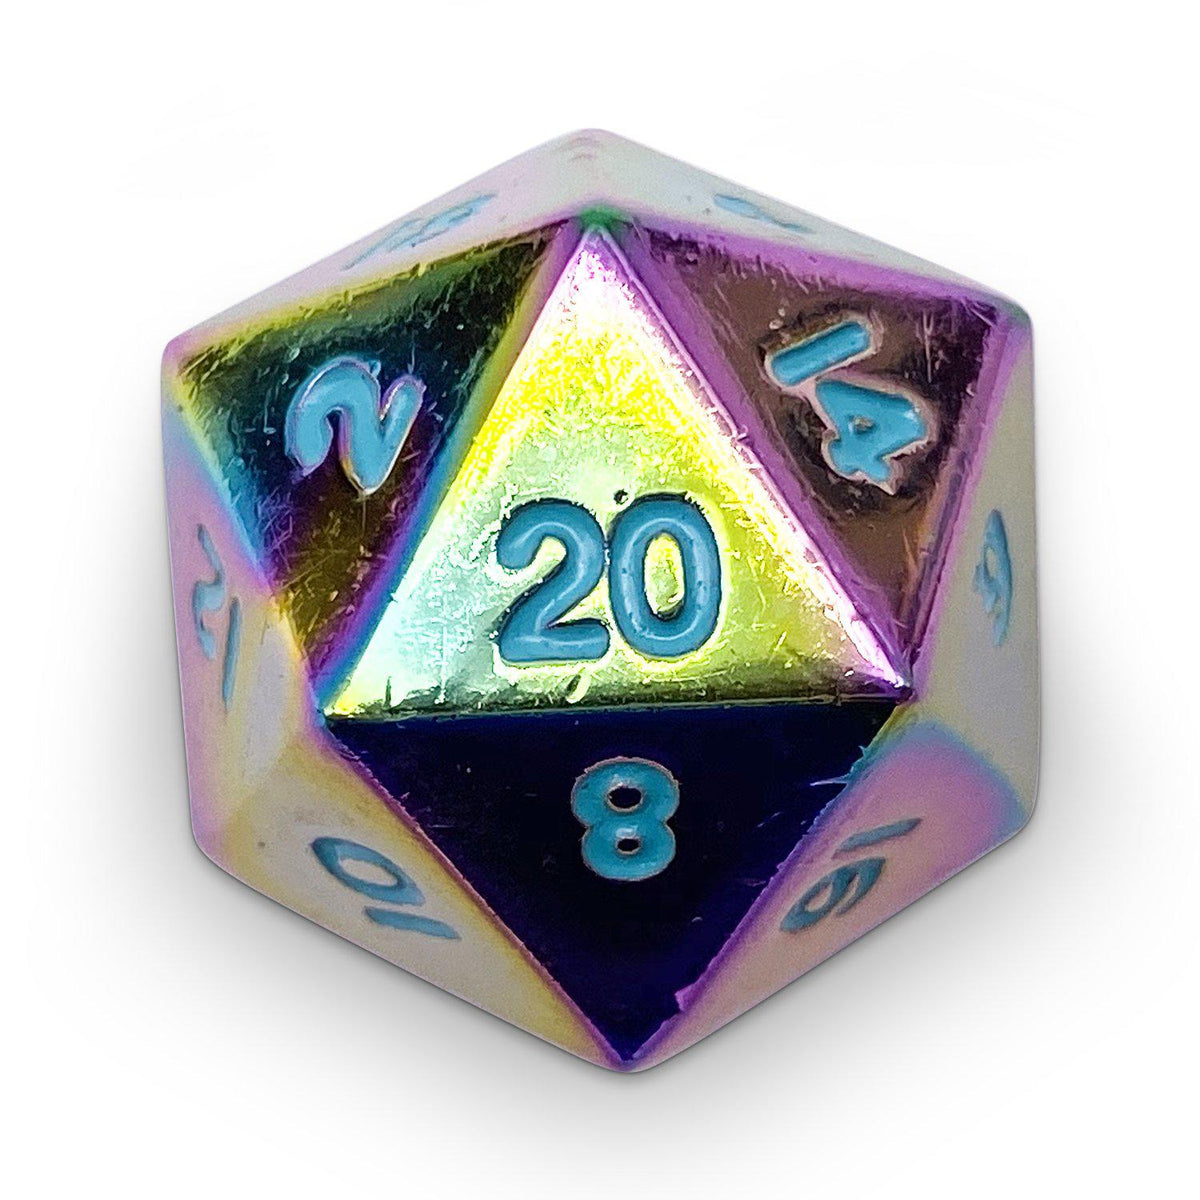 Single Alloy D20 in Queens Treasure by Norse Foundry - NOR 04564